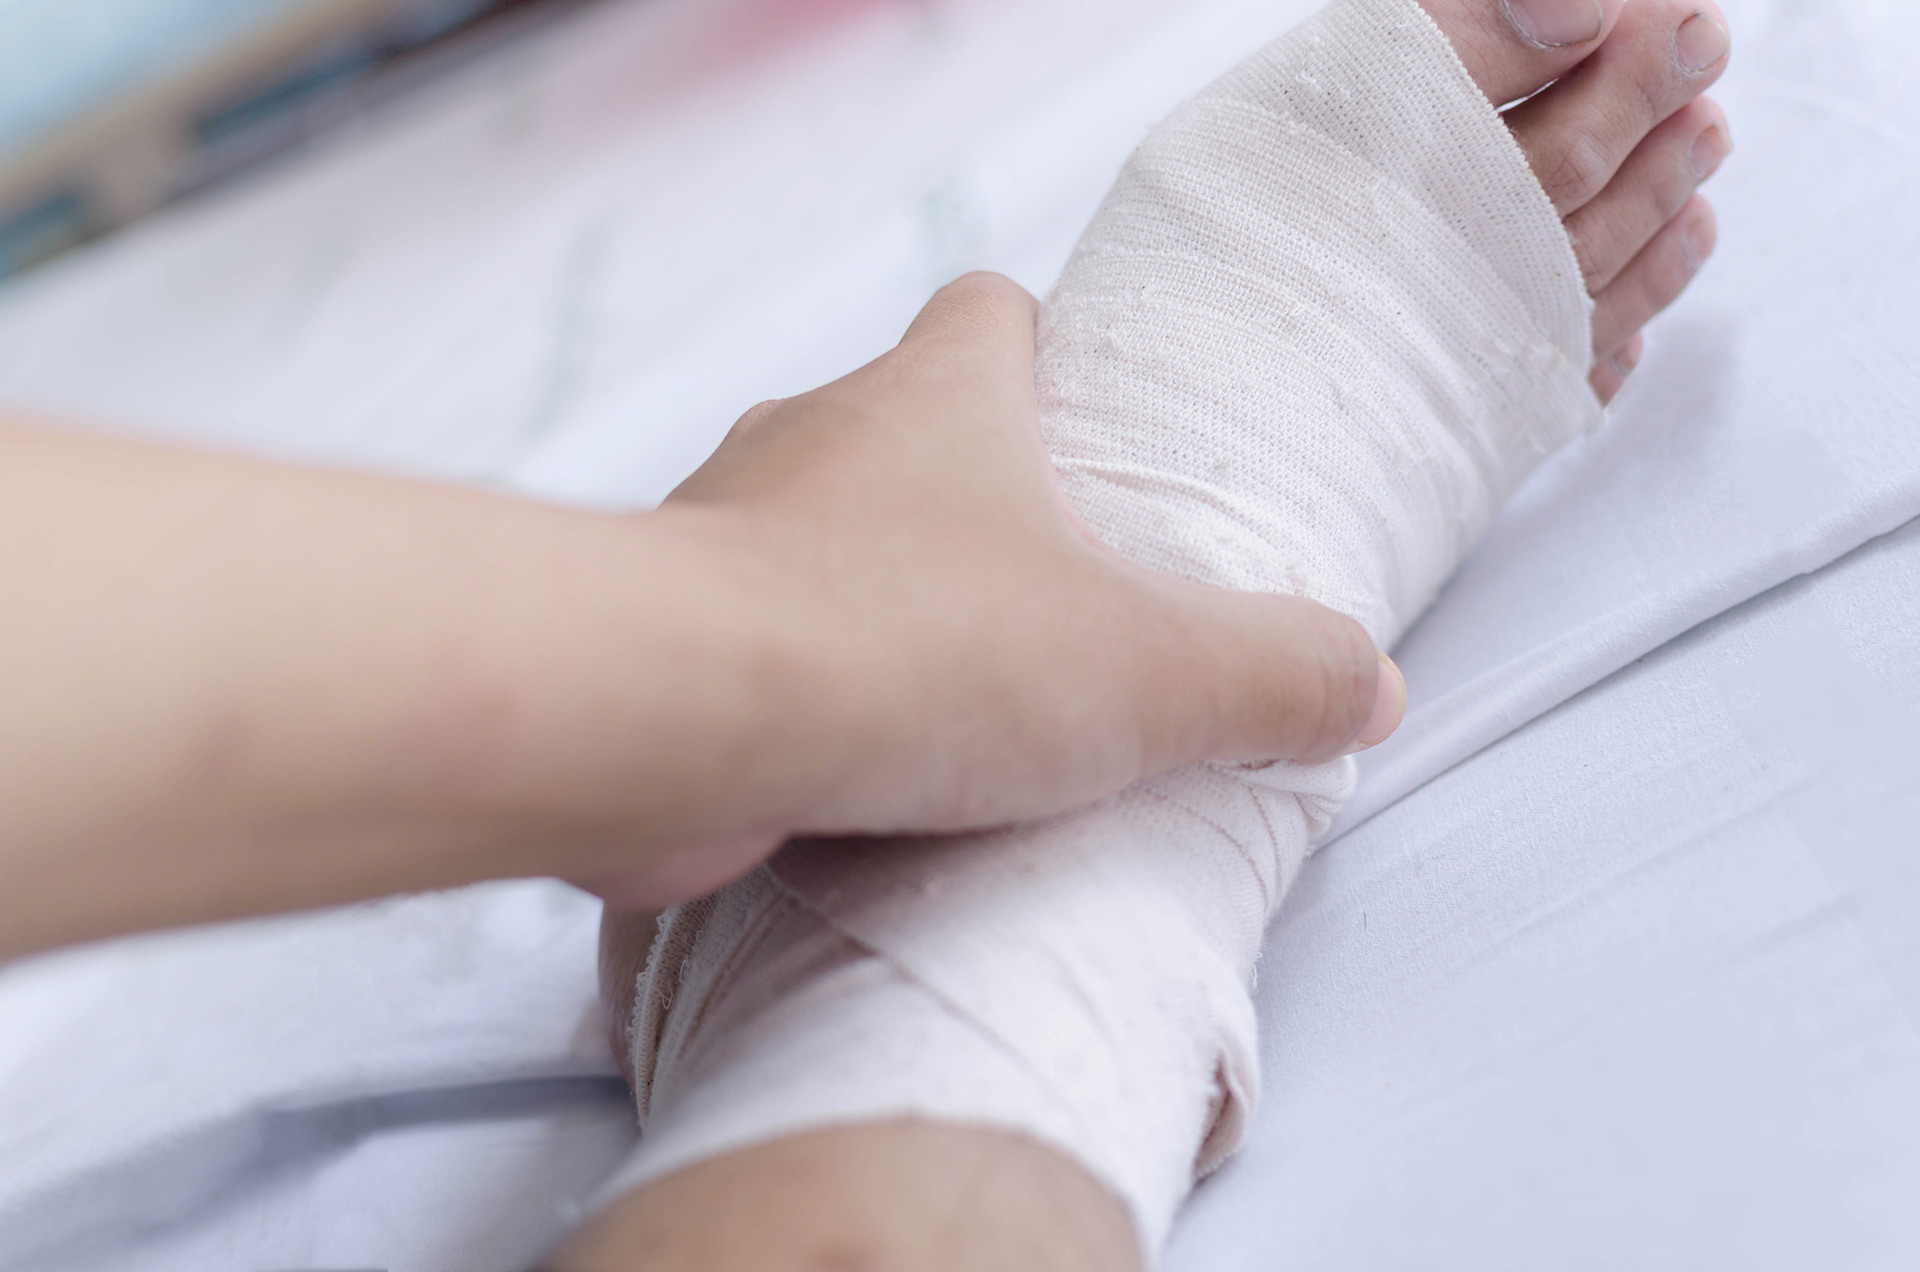 An Ankle Pain Within Bandage